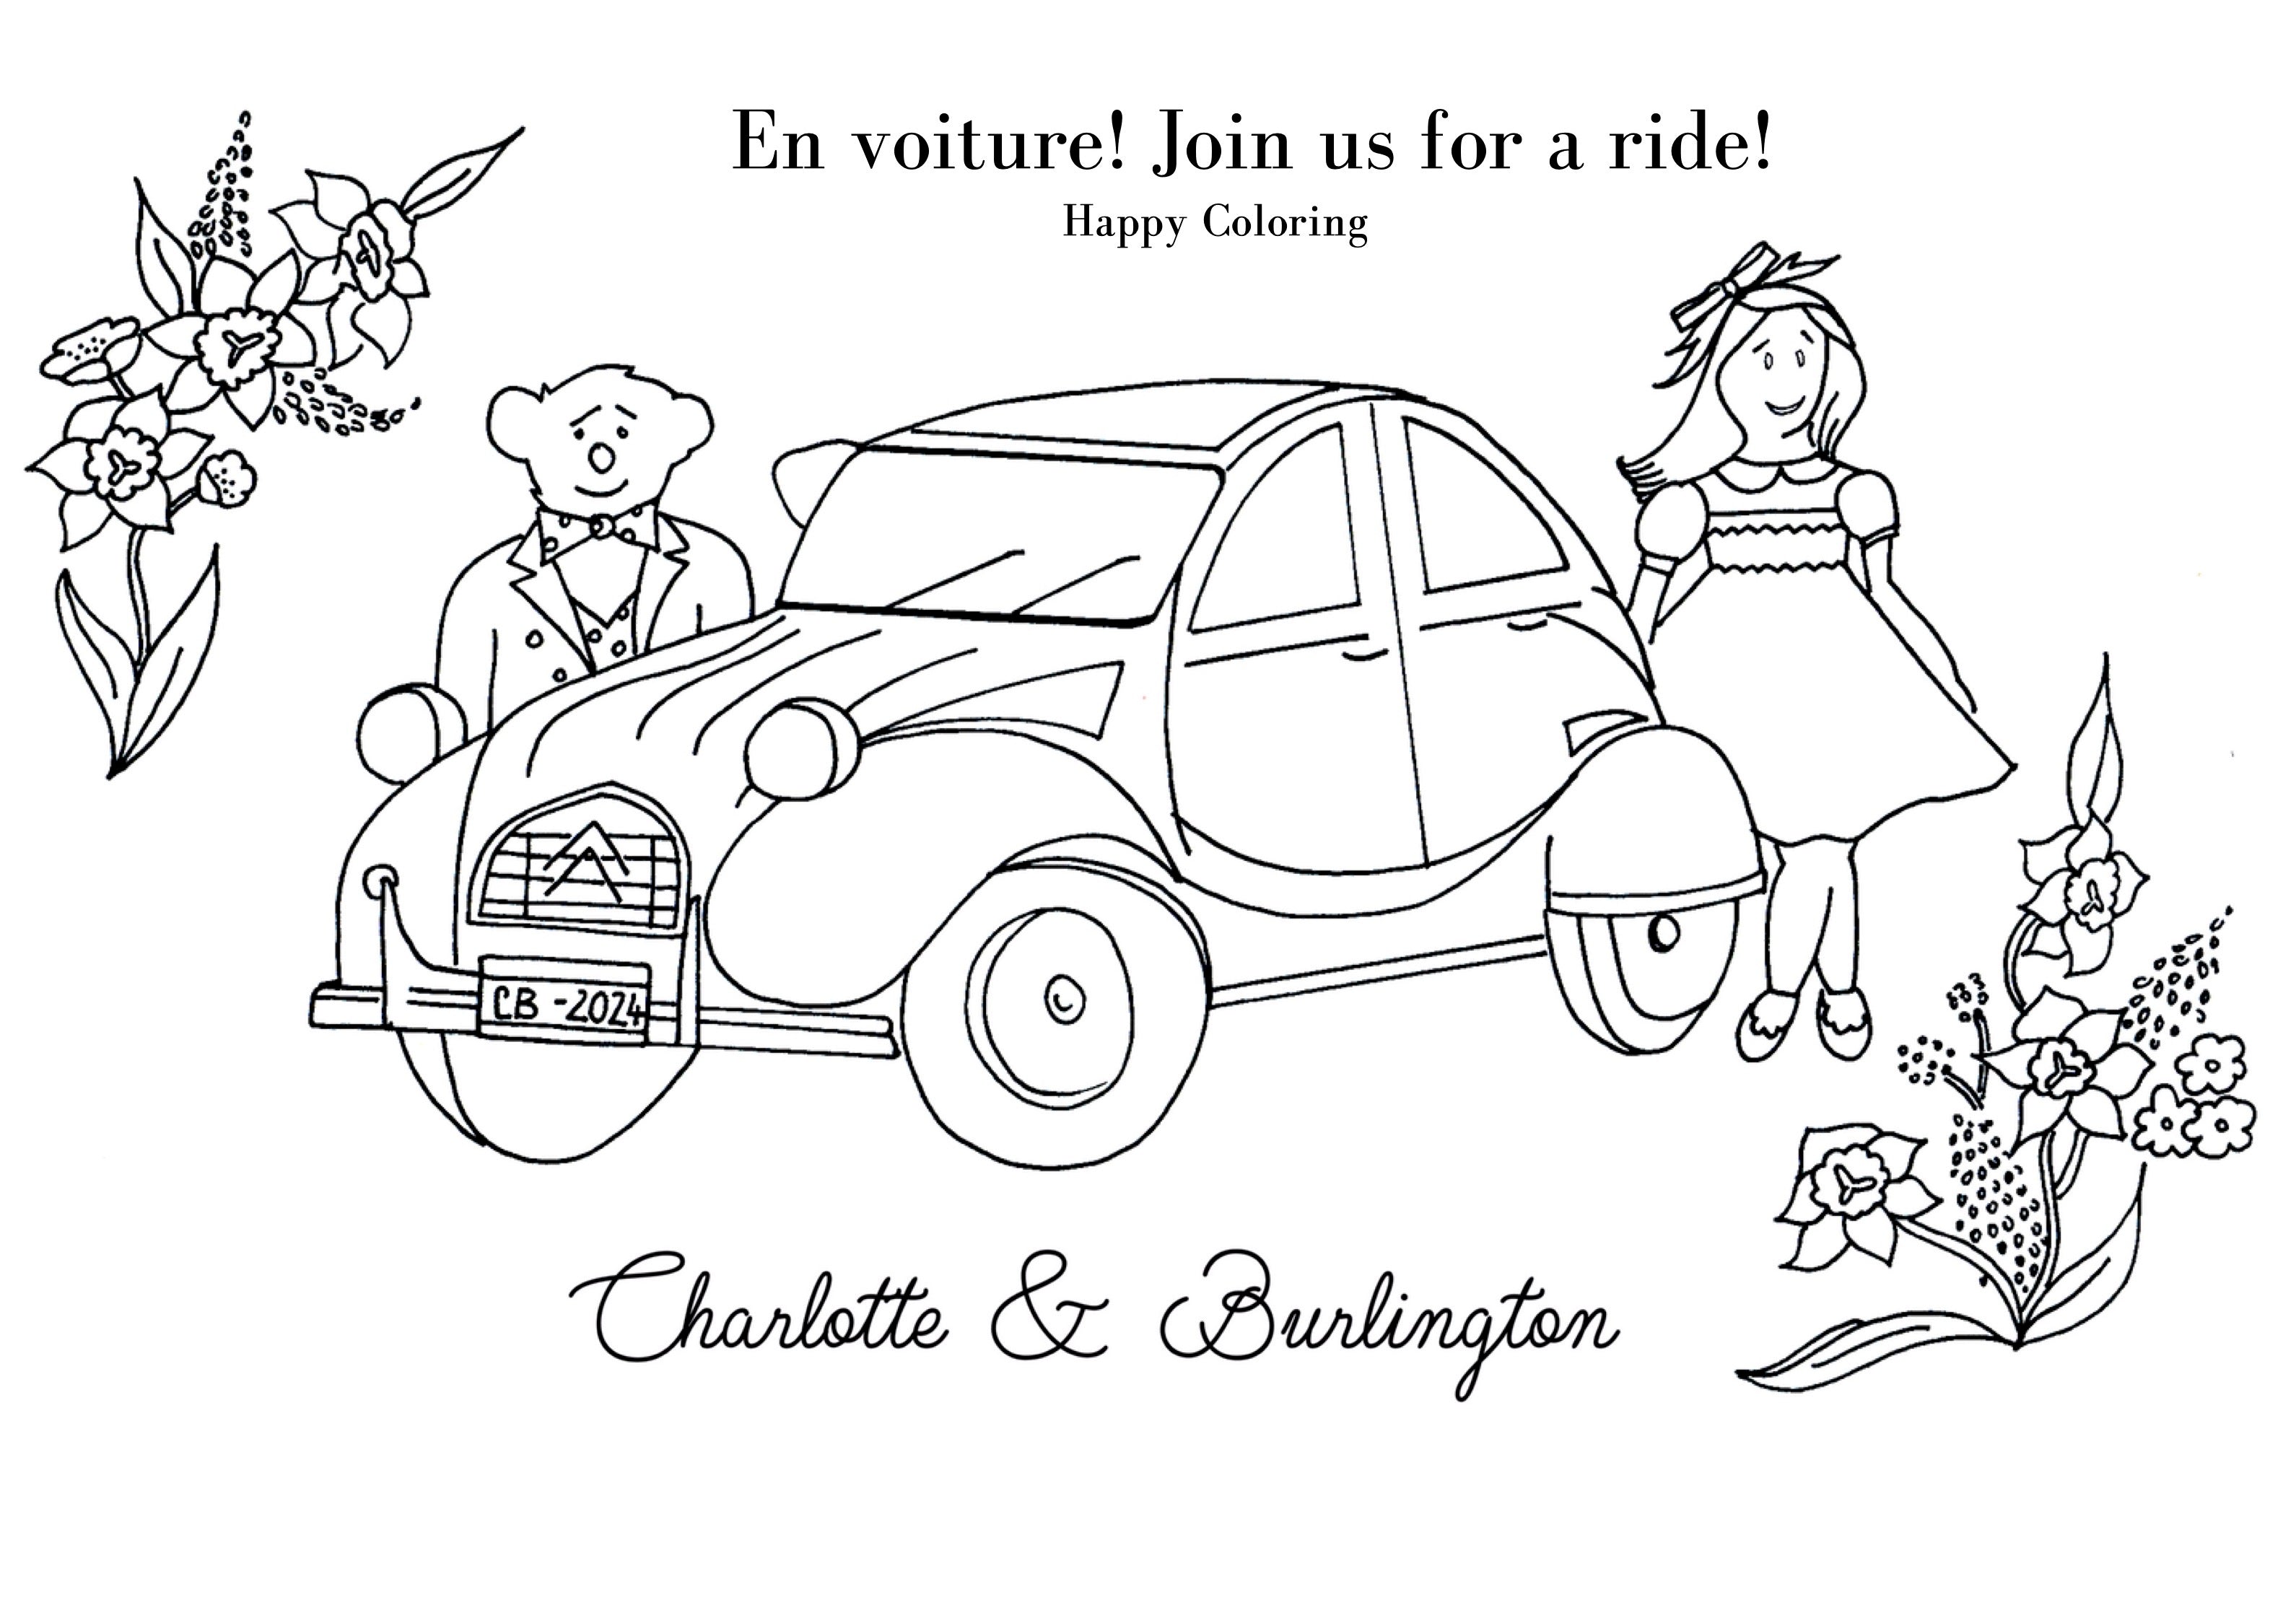 French 2cv car paris themed coloring for children free downloadable for kids